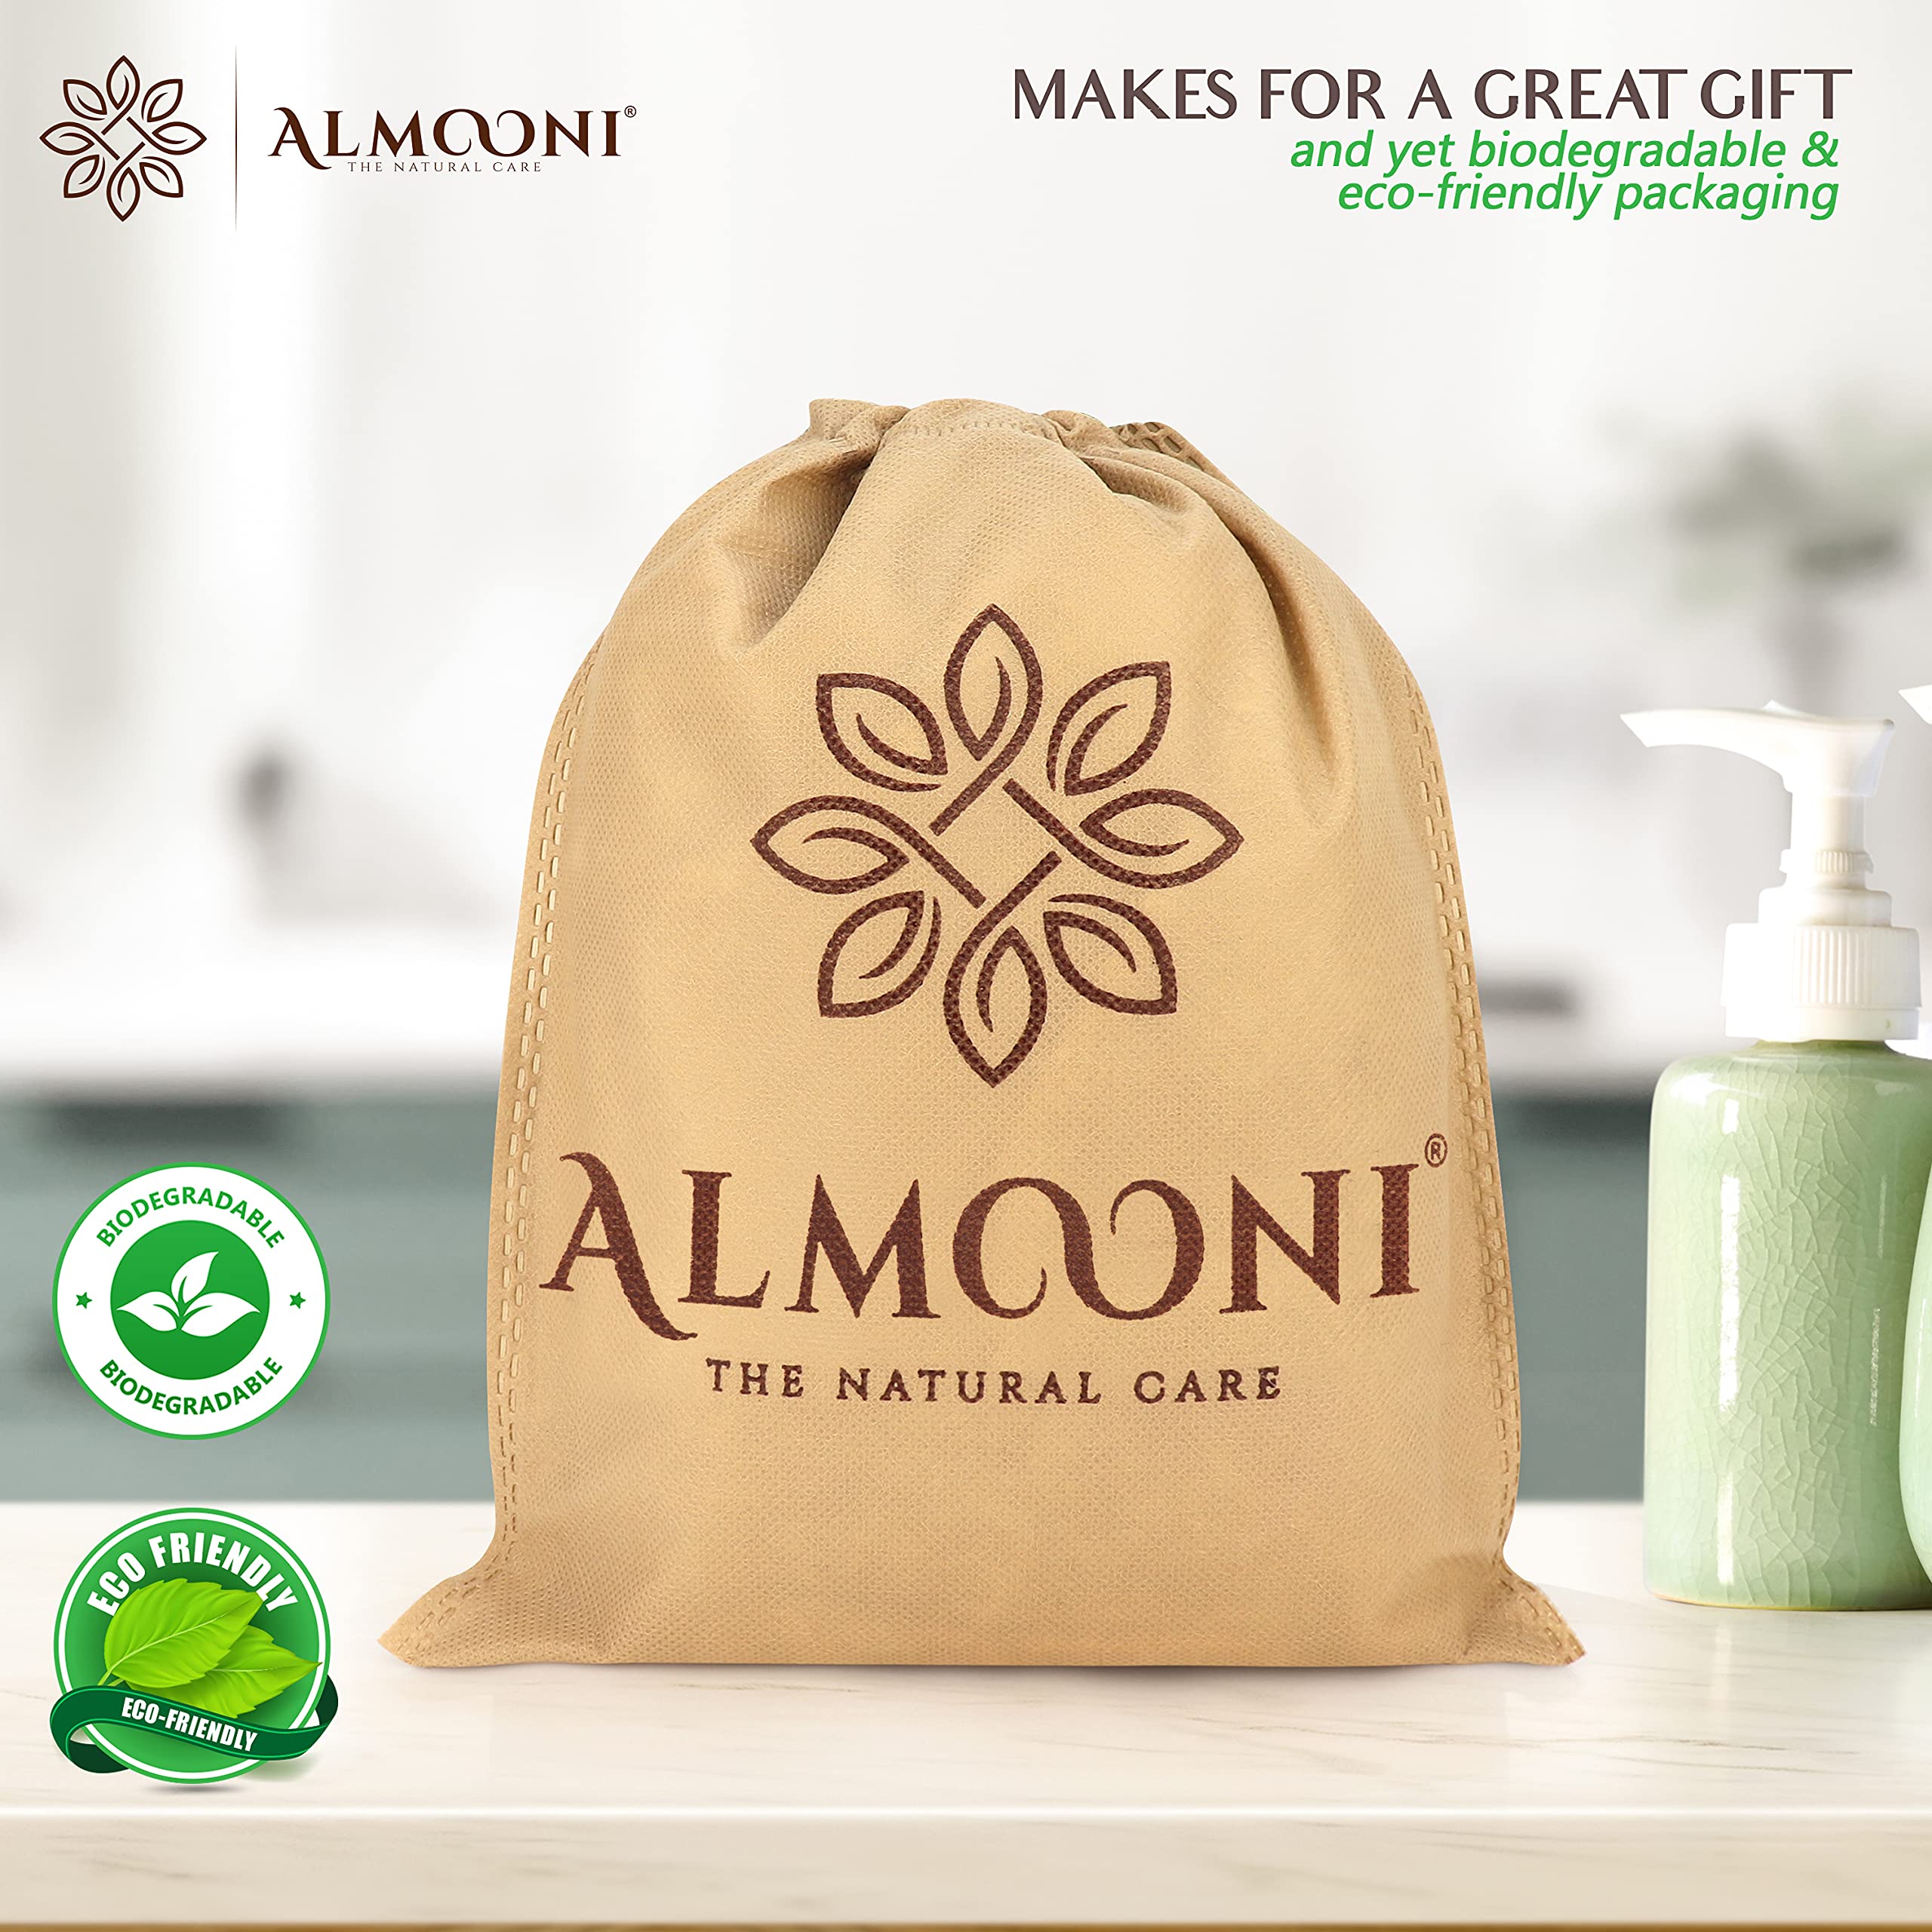 Almooni Premium Exfoliating Loofah Pad Body Scrubber, Made with Natural Egyptian Shower loofa Sponge That Gets You Clean, Not Just Spreading Soap - 2 Count(1 Pack)